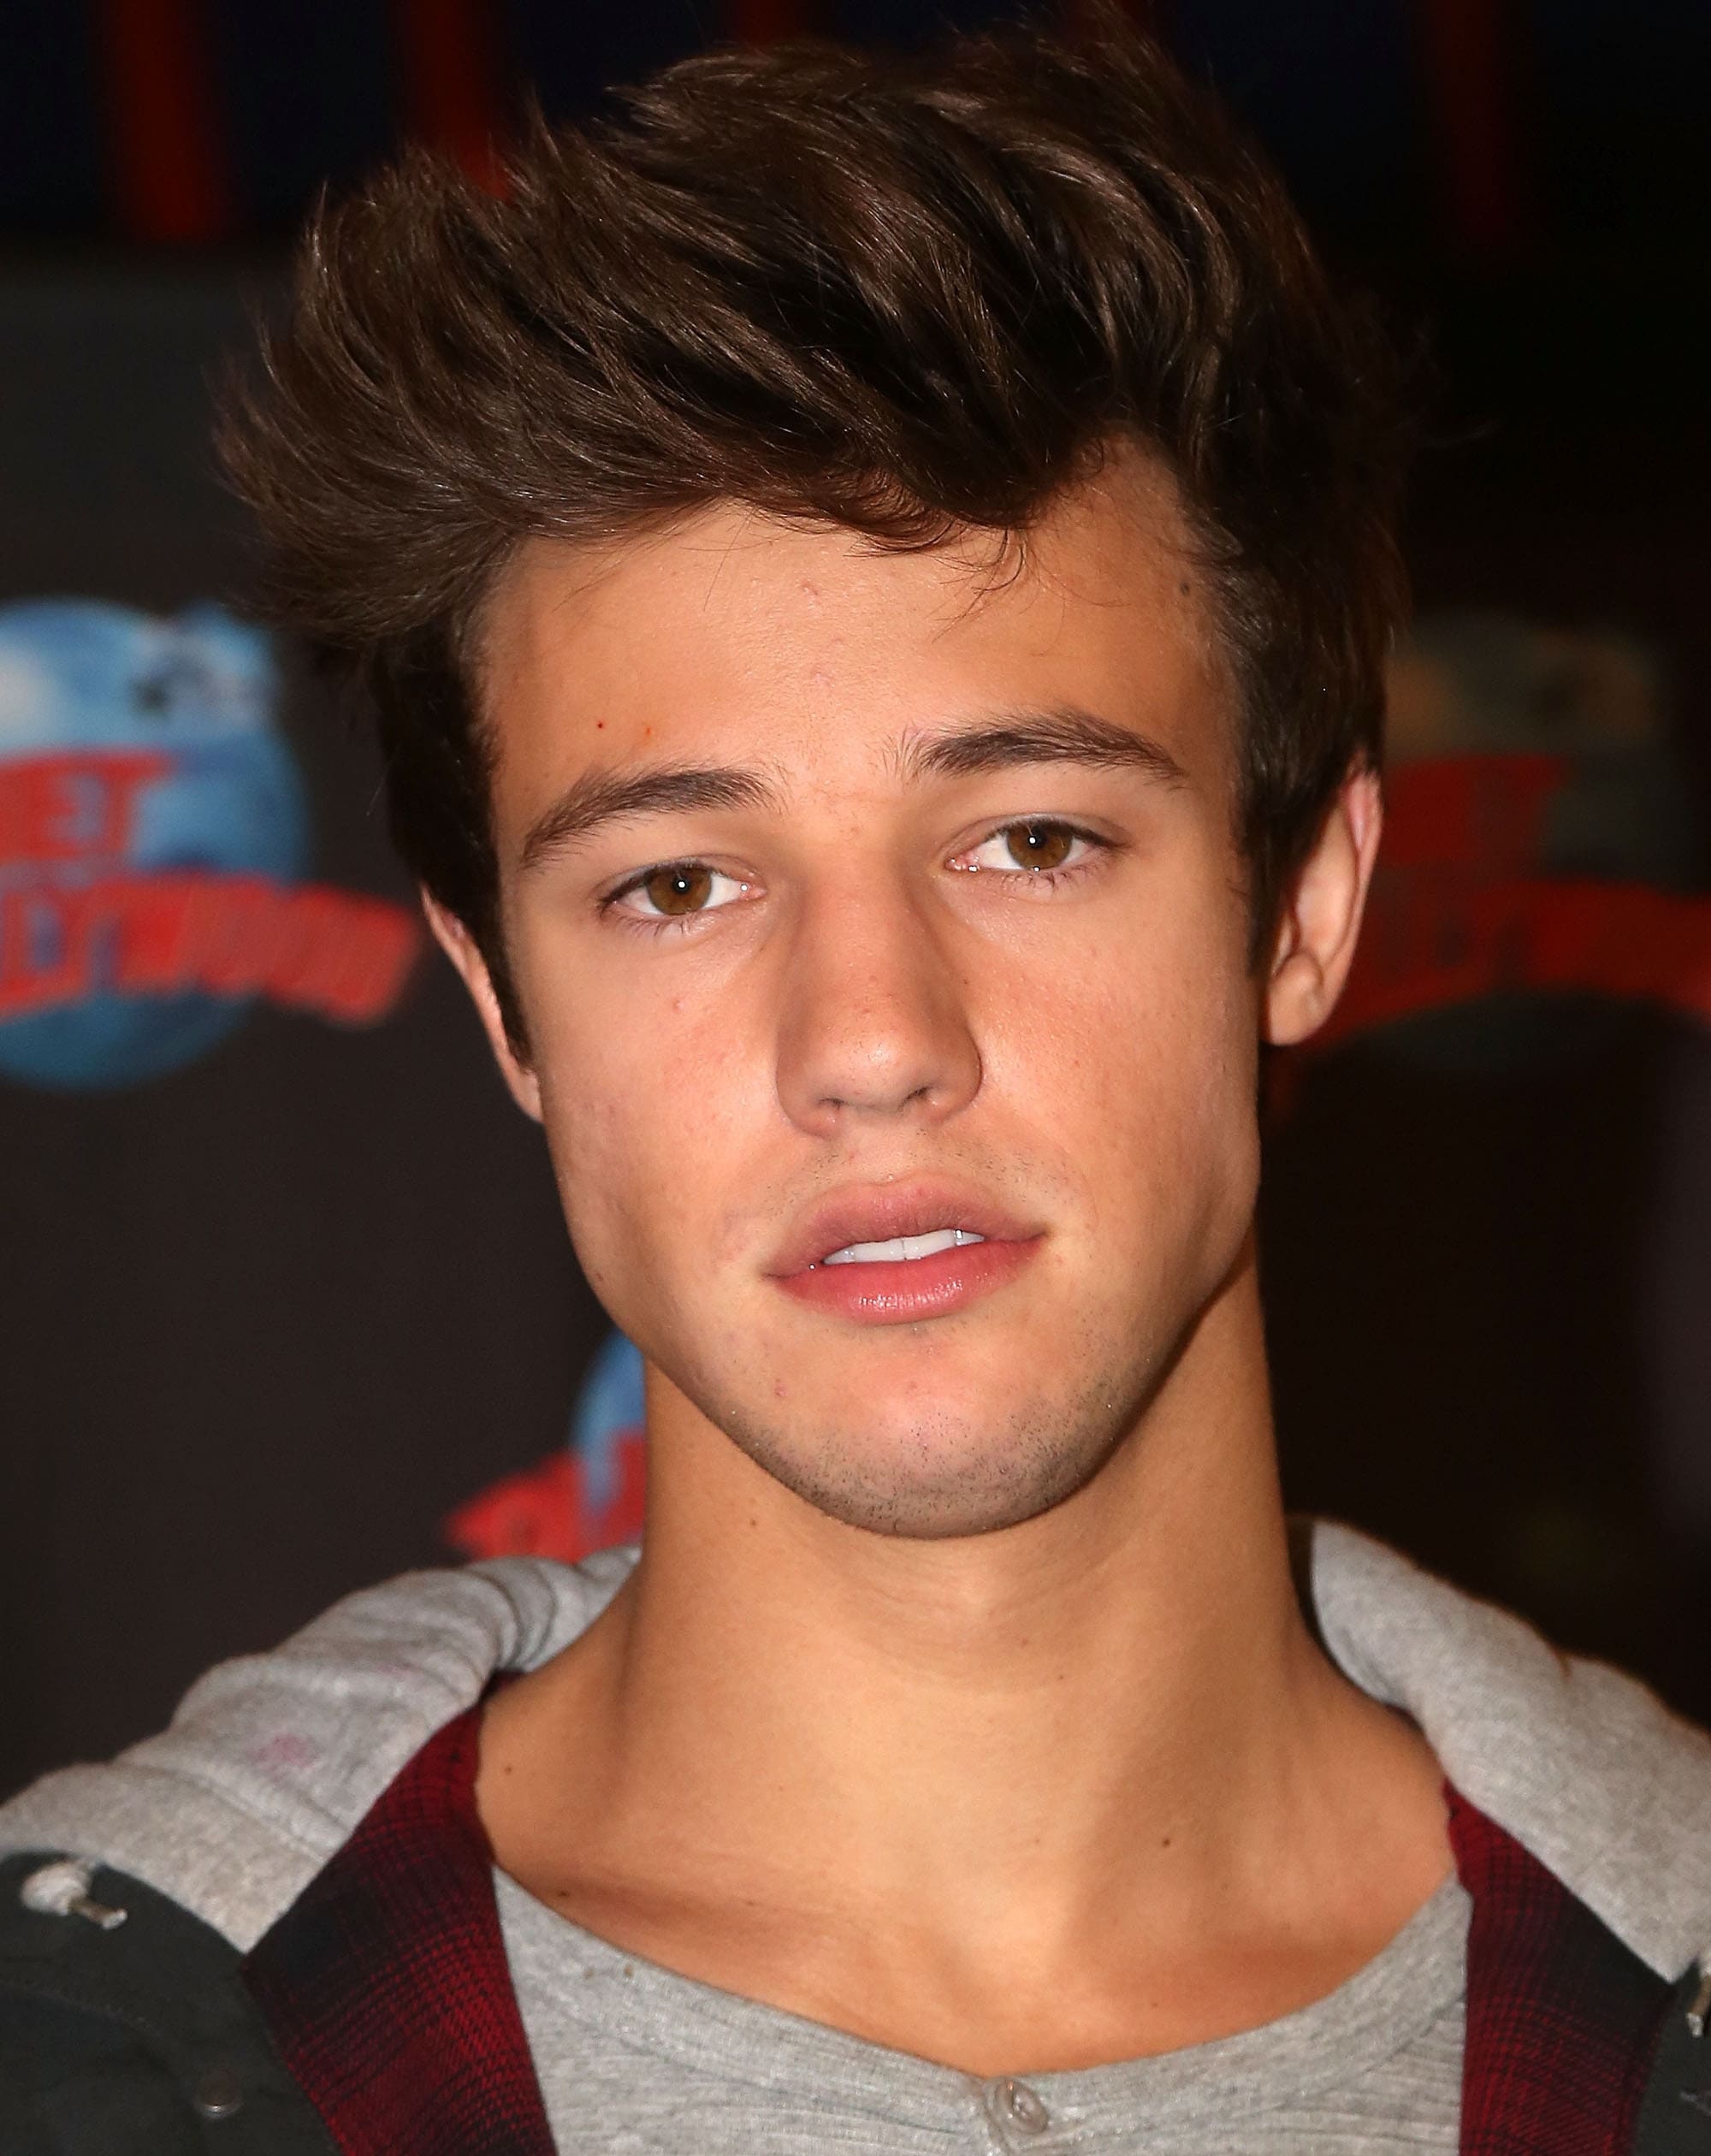 Cameron Dallas: Played Frankie Payton in an American sports comedy-drama film, The Outfield. 2000x2520 HD Wallpaper.